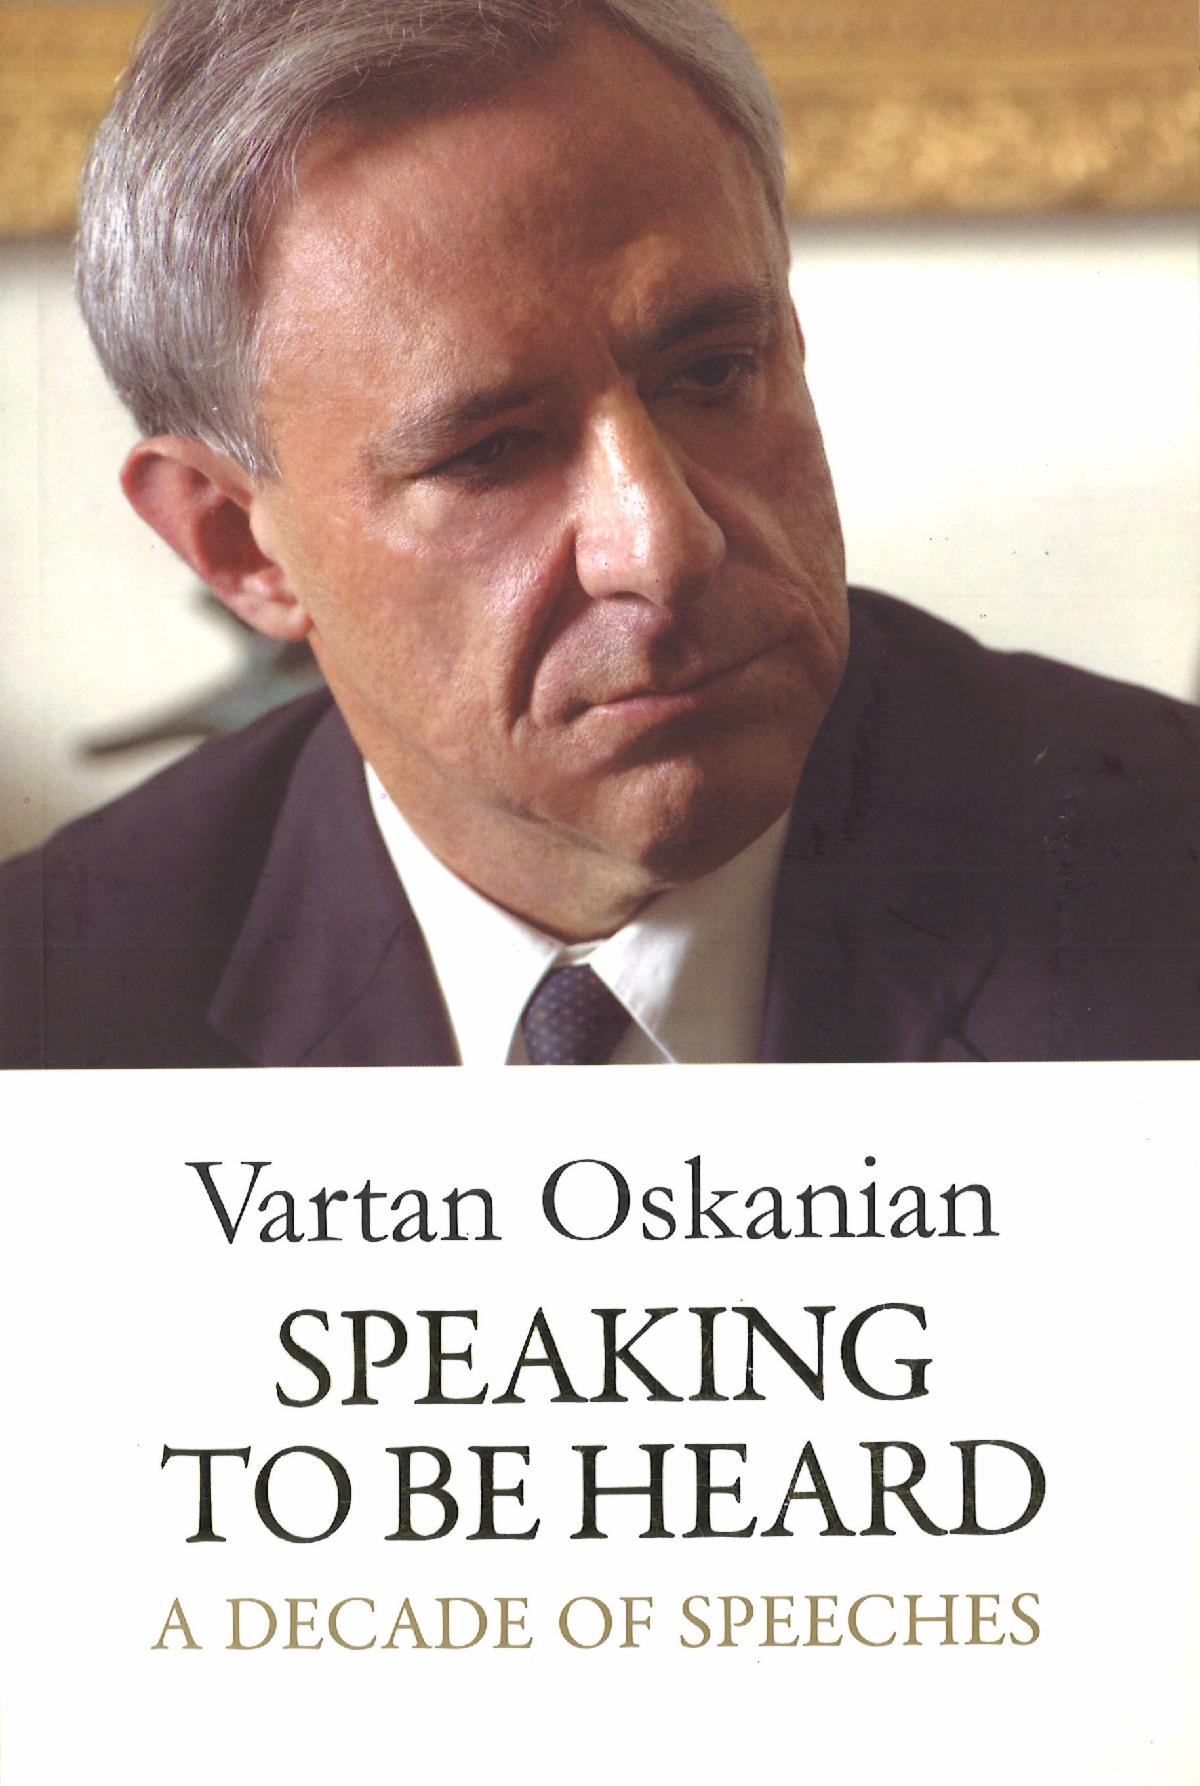 SPEAKING TO BE HEARD: A DECADE OF SPEECHES